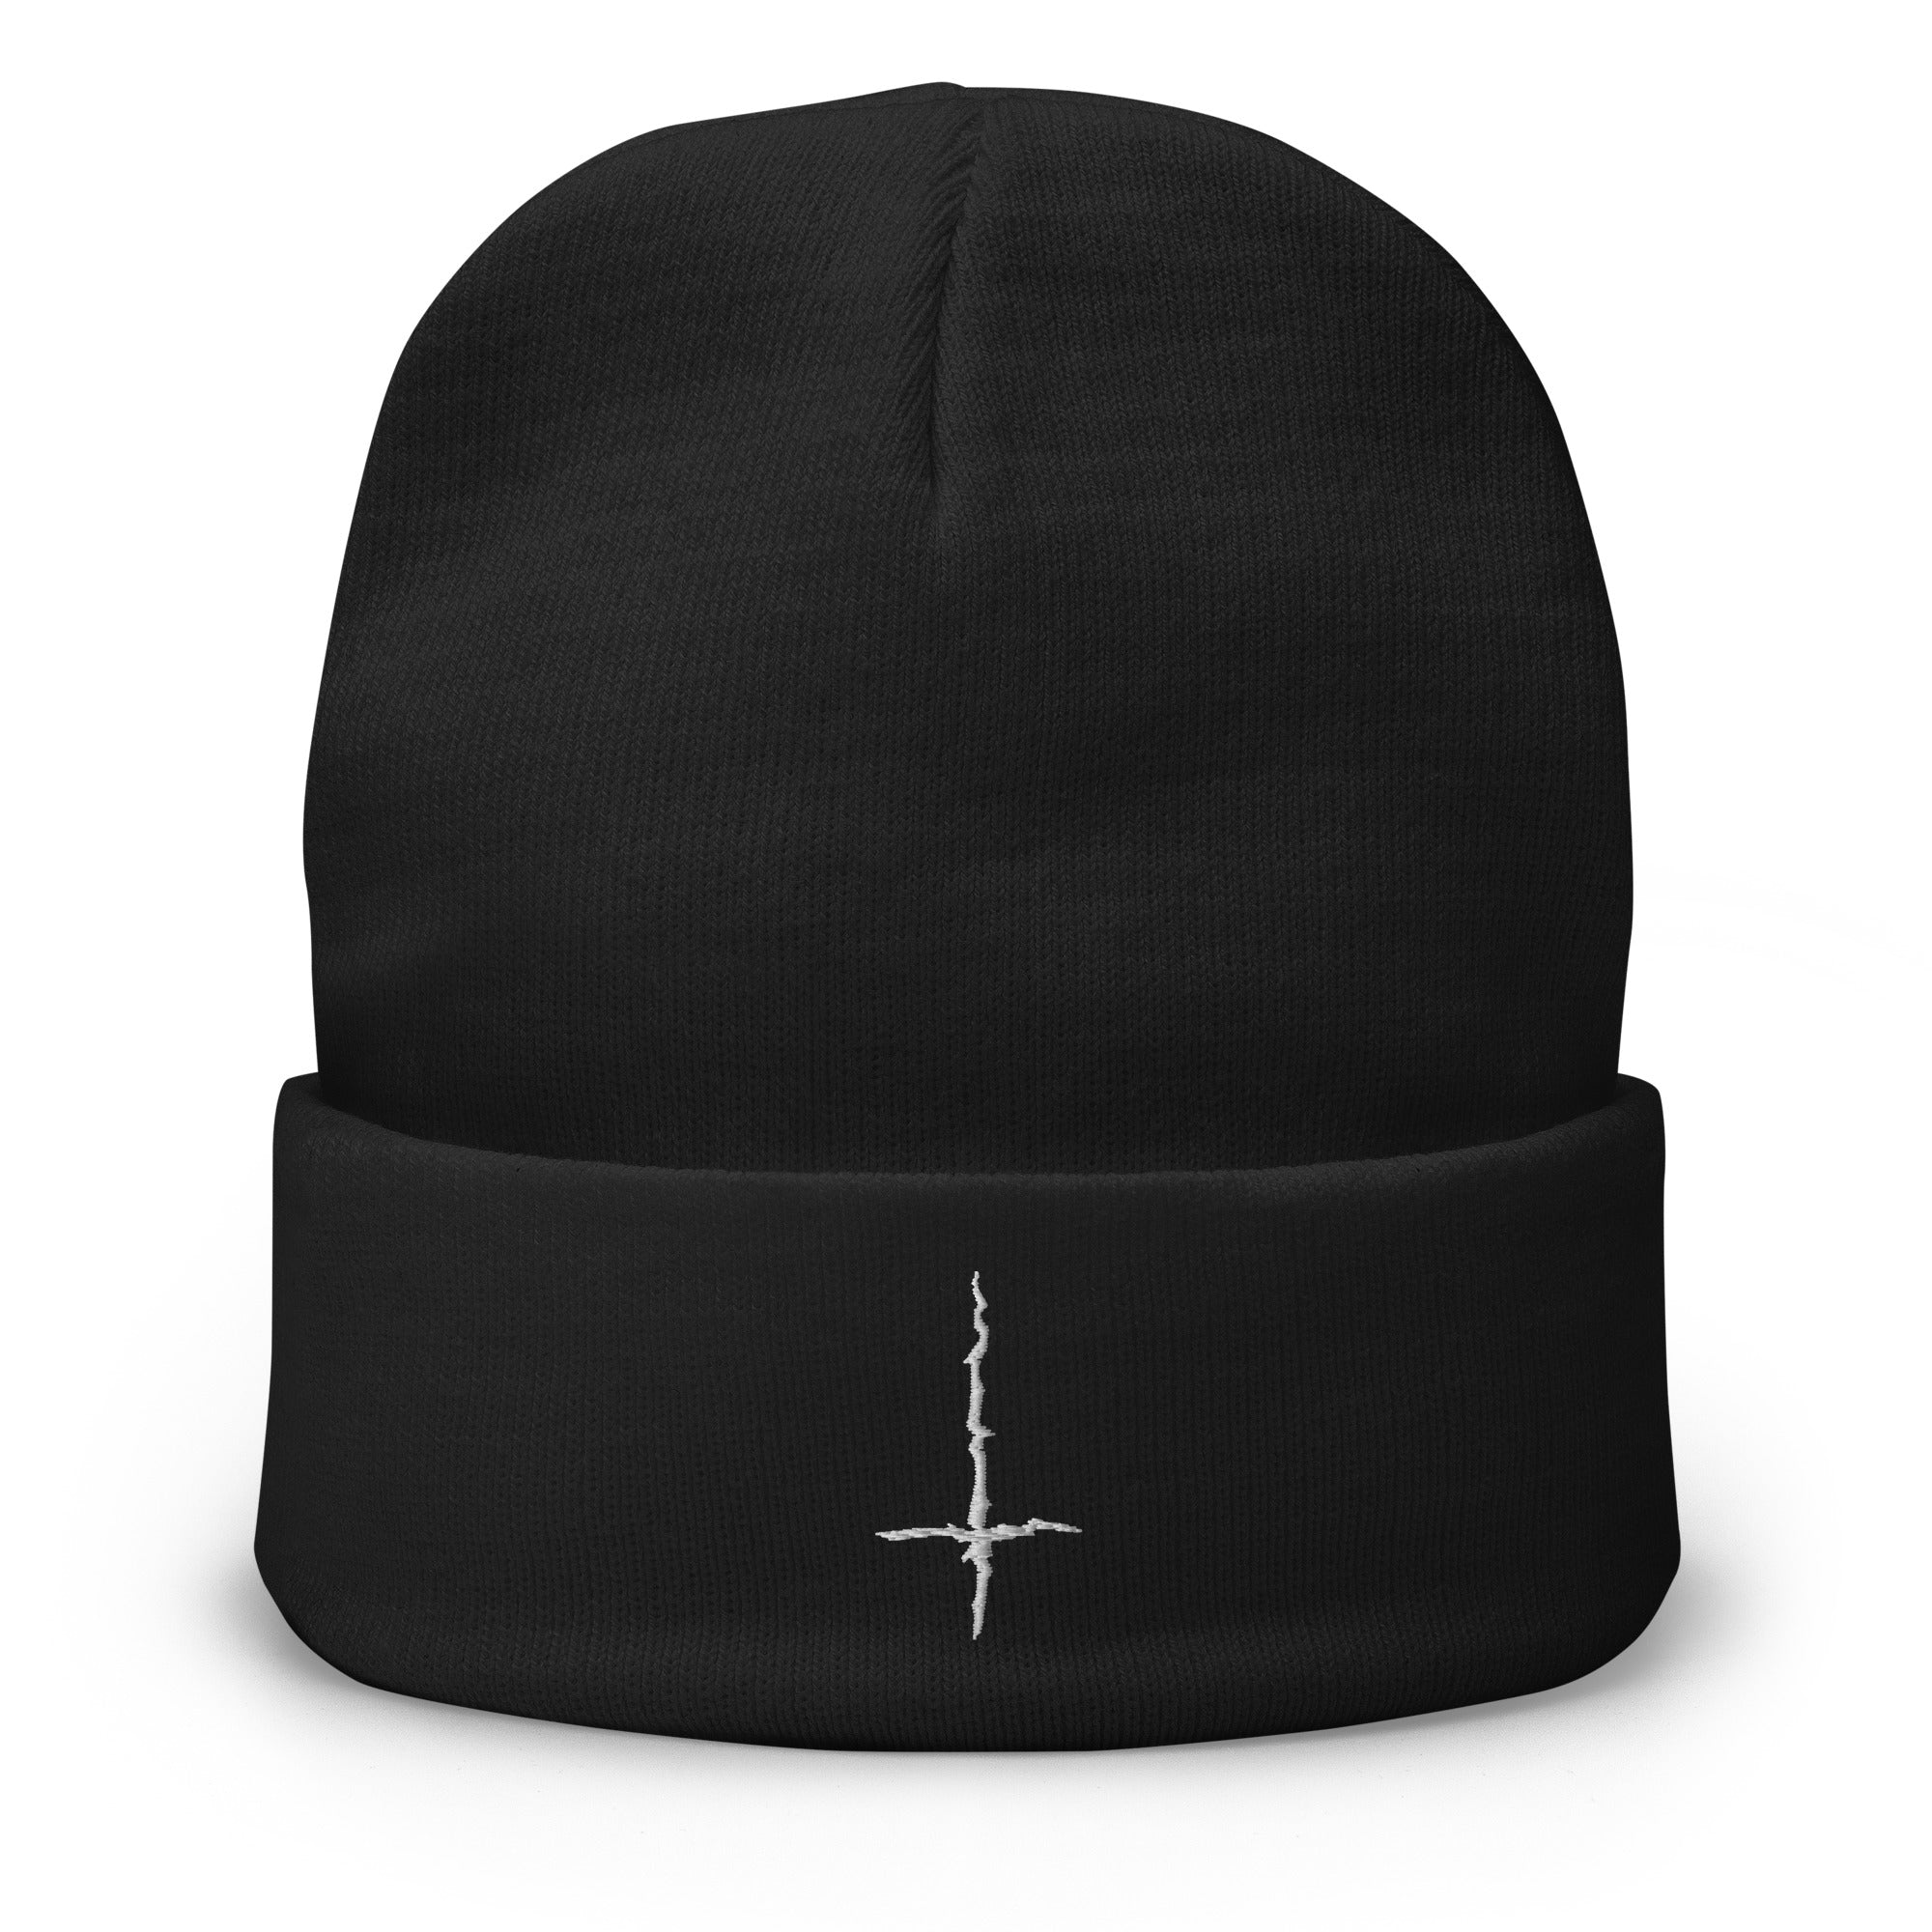 Black Metal Style Inverted Cross Embroidered Cuff Beanie Satanic Ritual White Thread - Edge of Life Designs